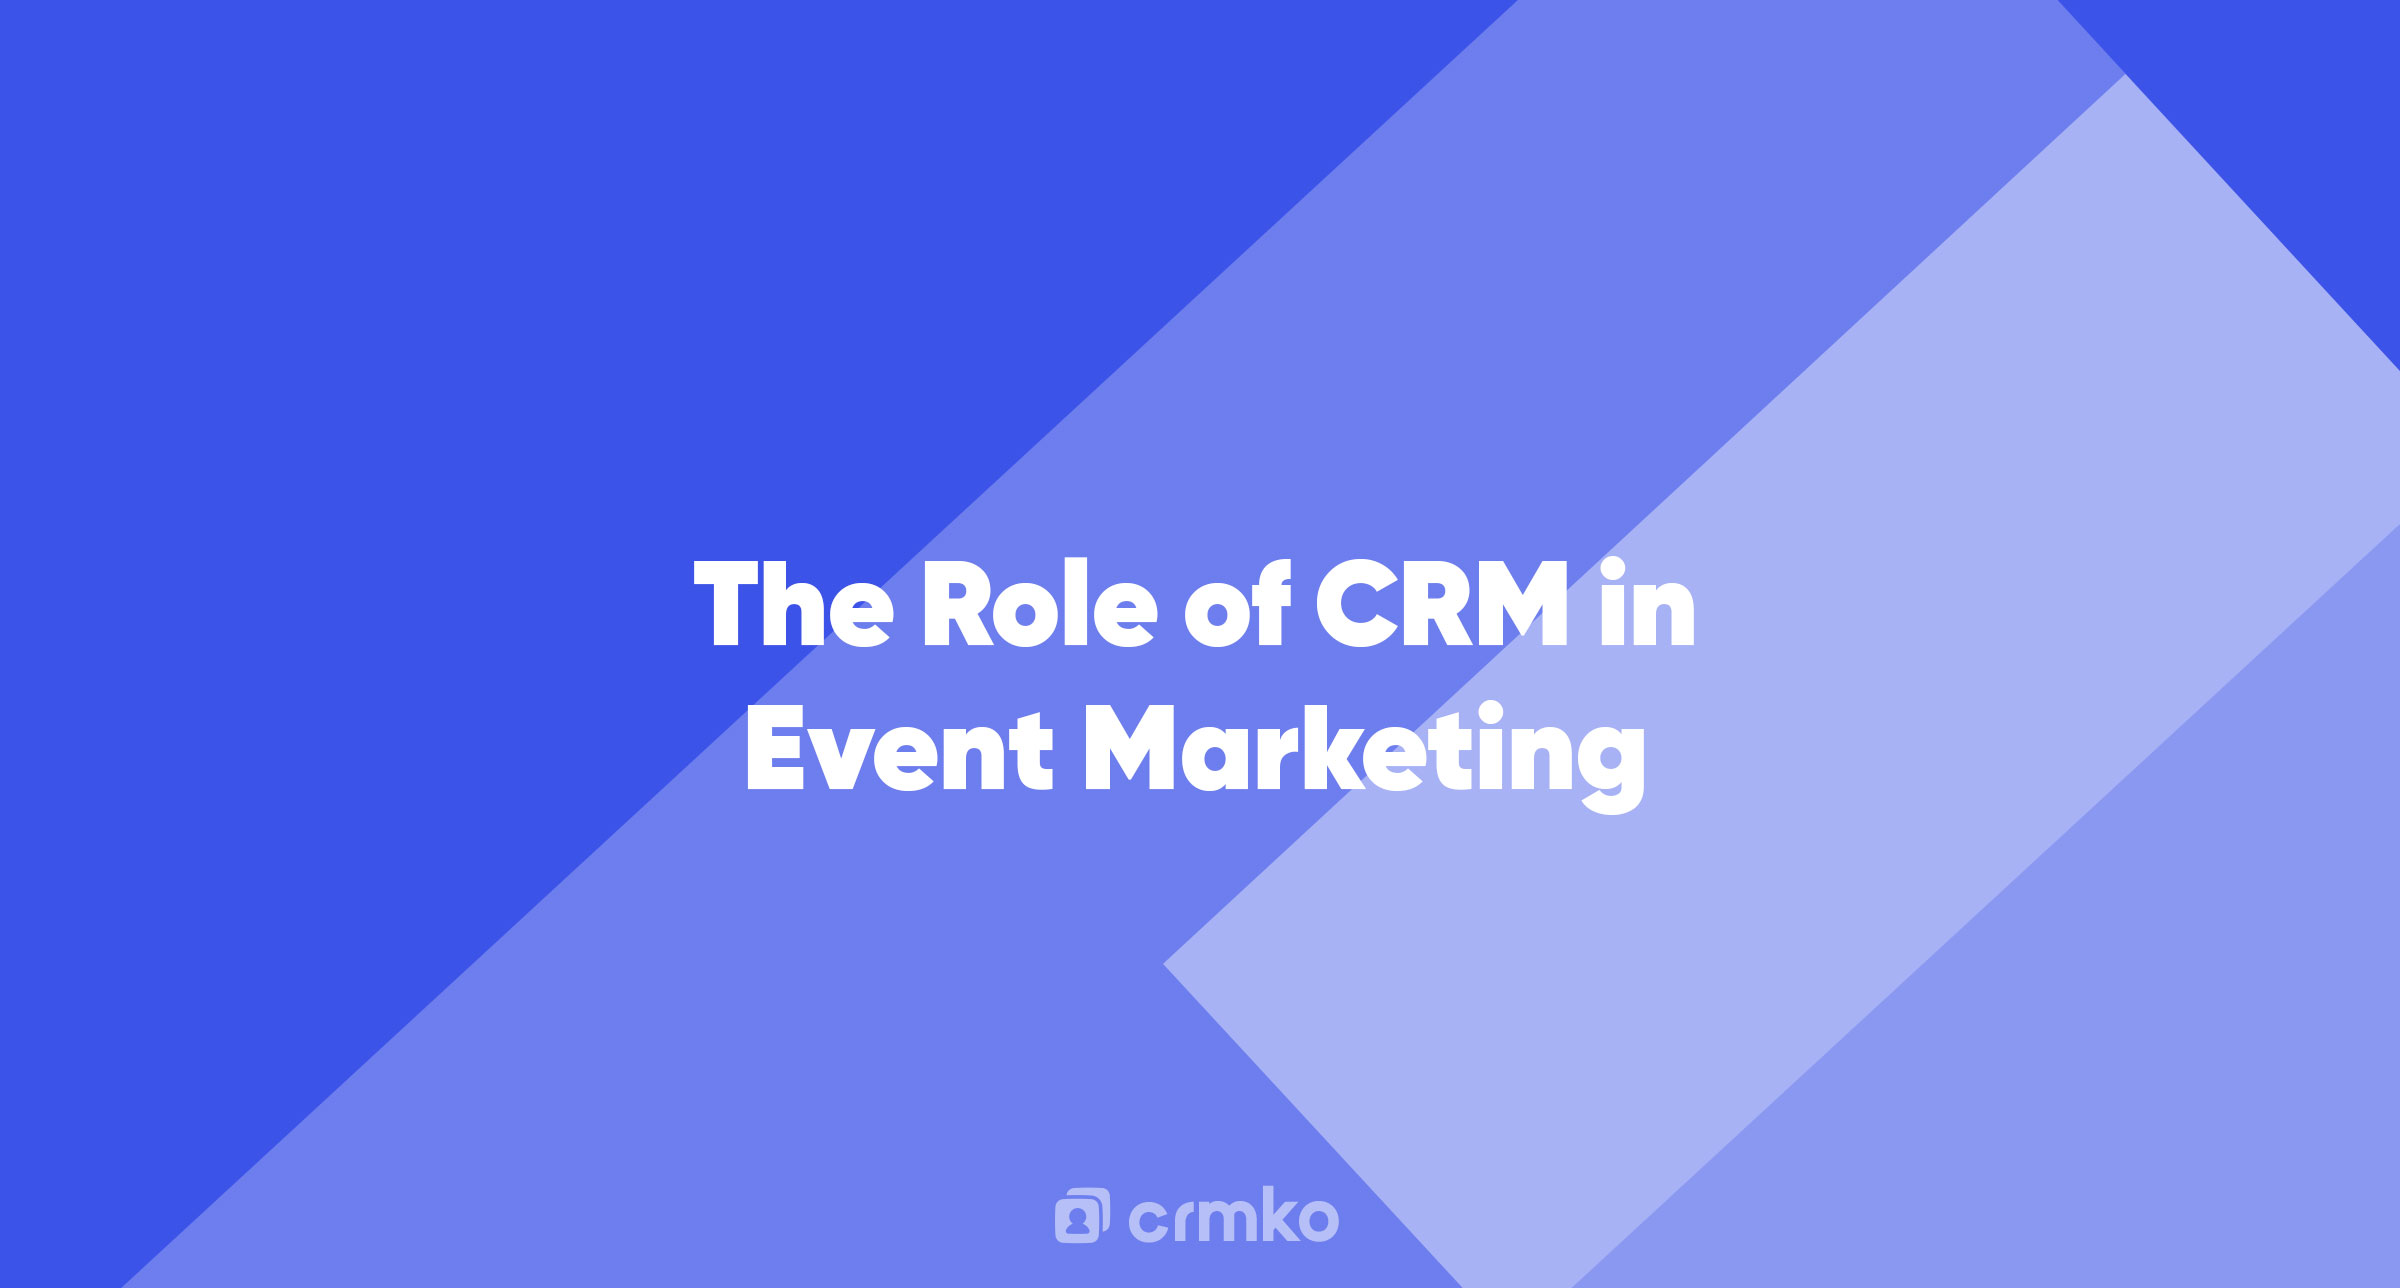 Article | The Role of CRM in Event Marketing